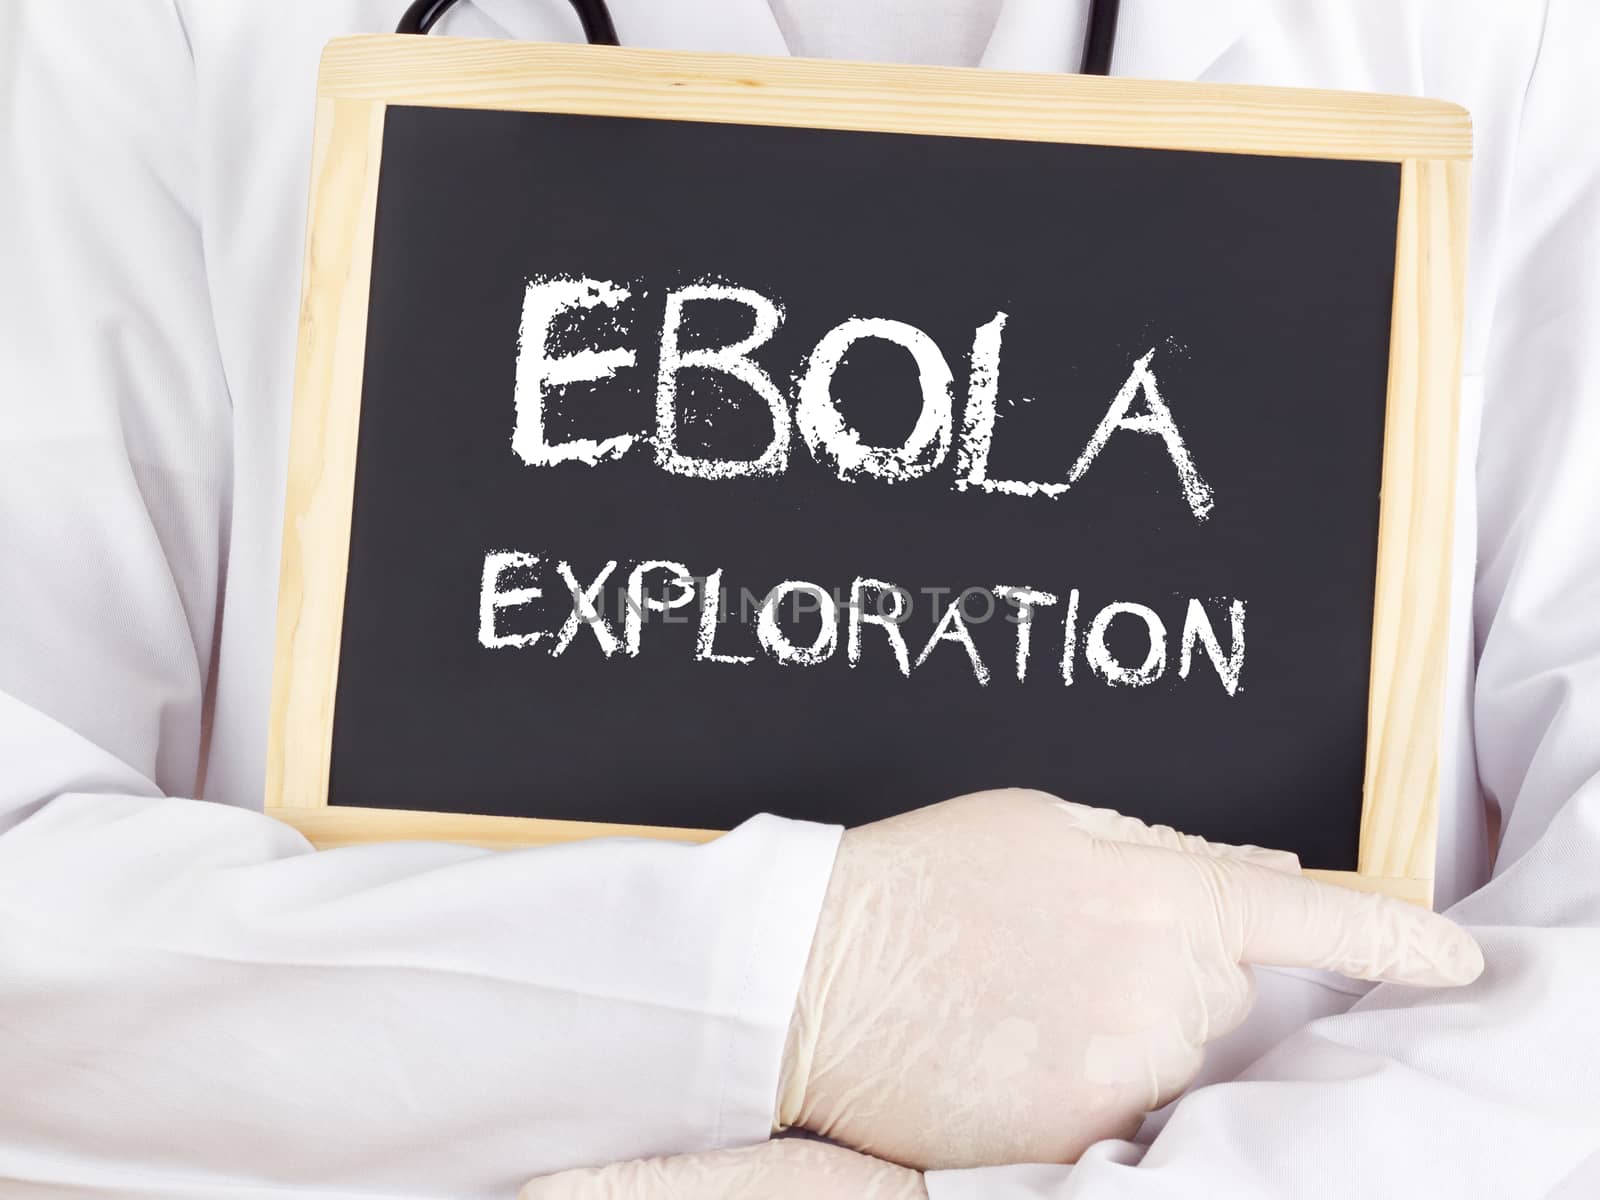 Doctor shows information: Ebola exploration by gwolters